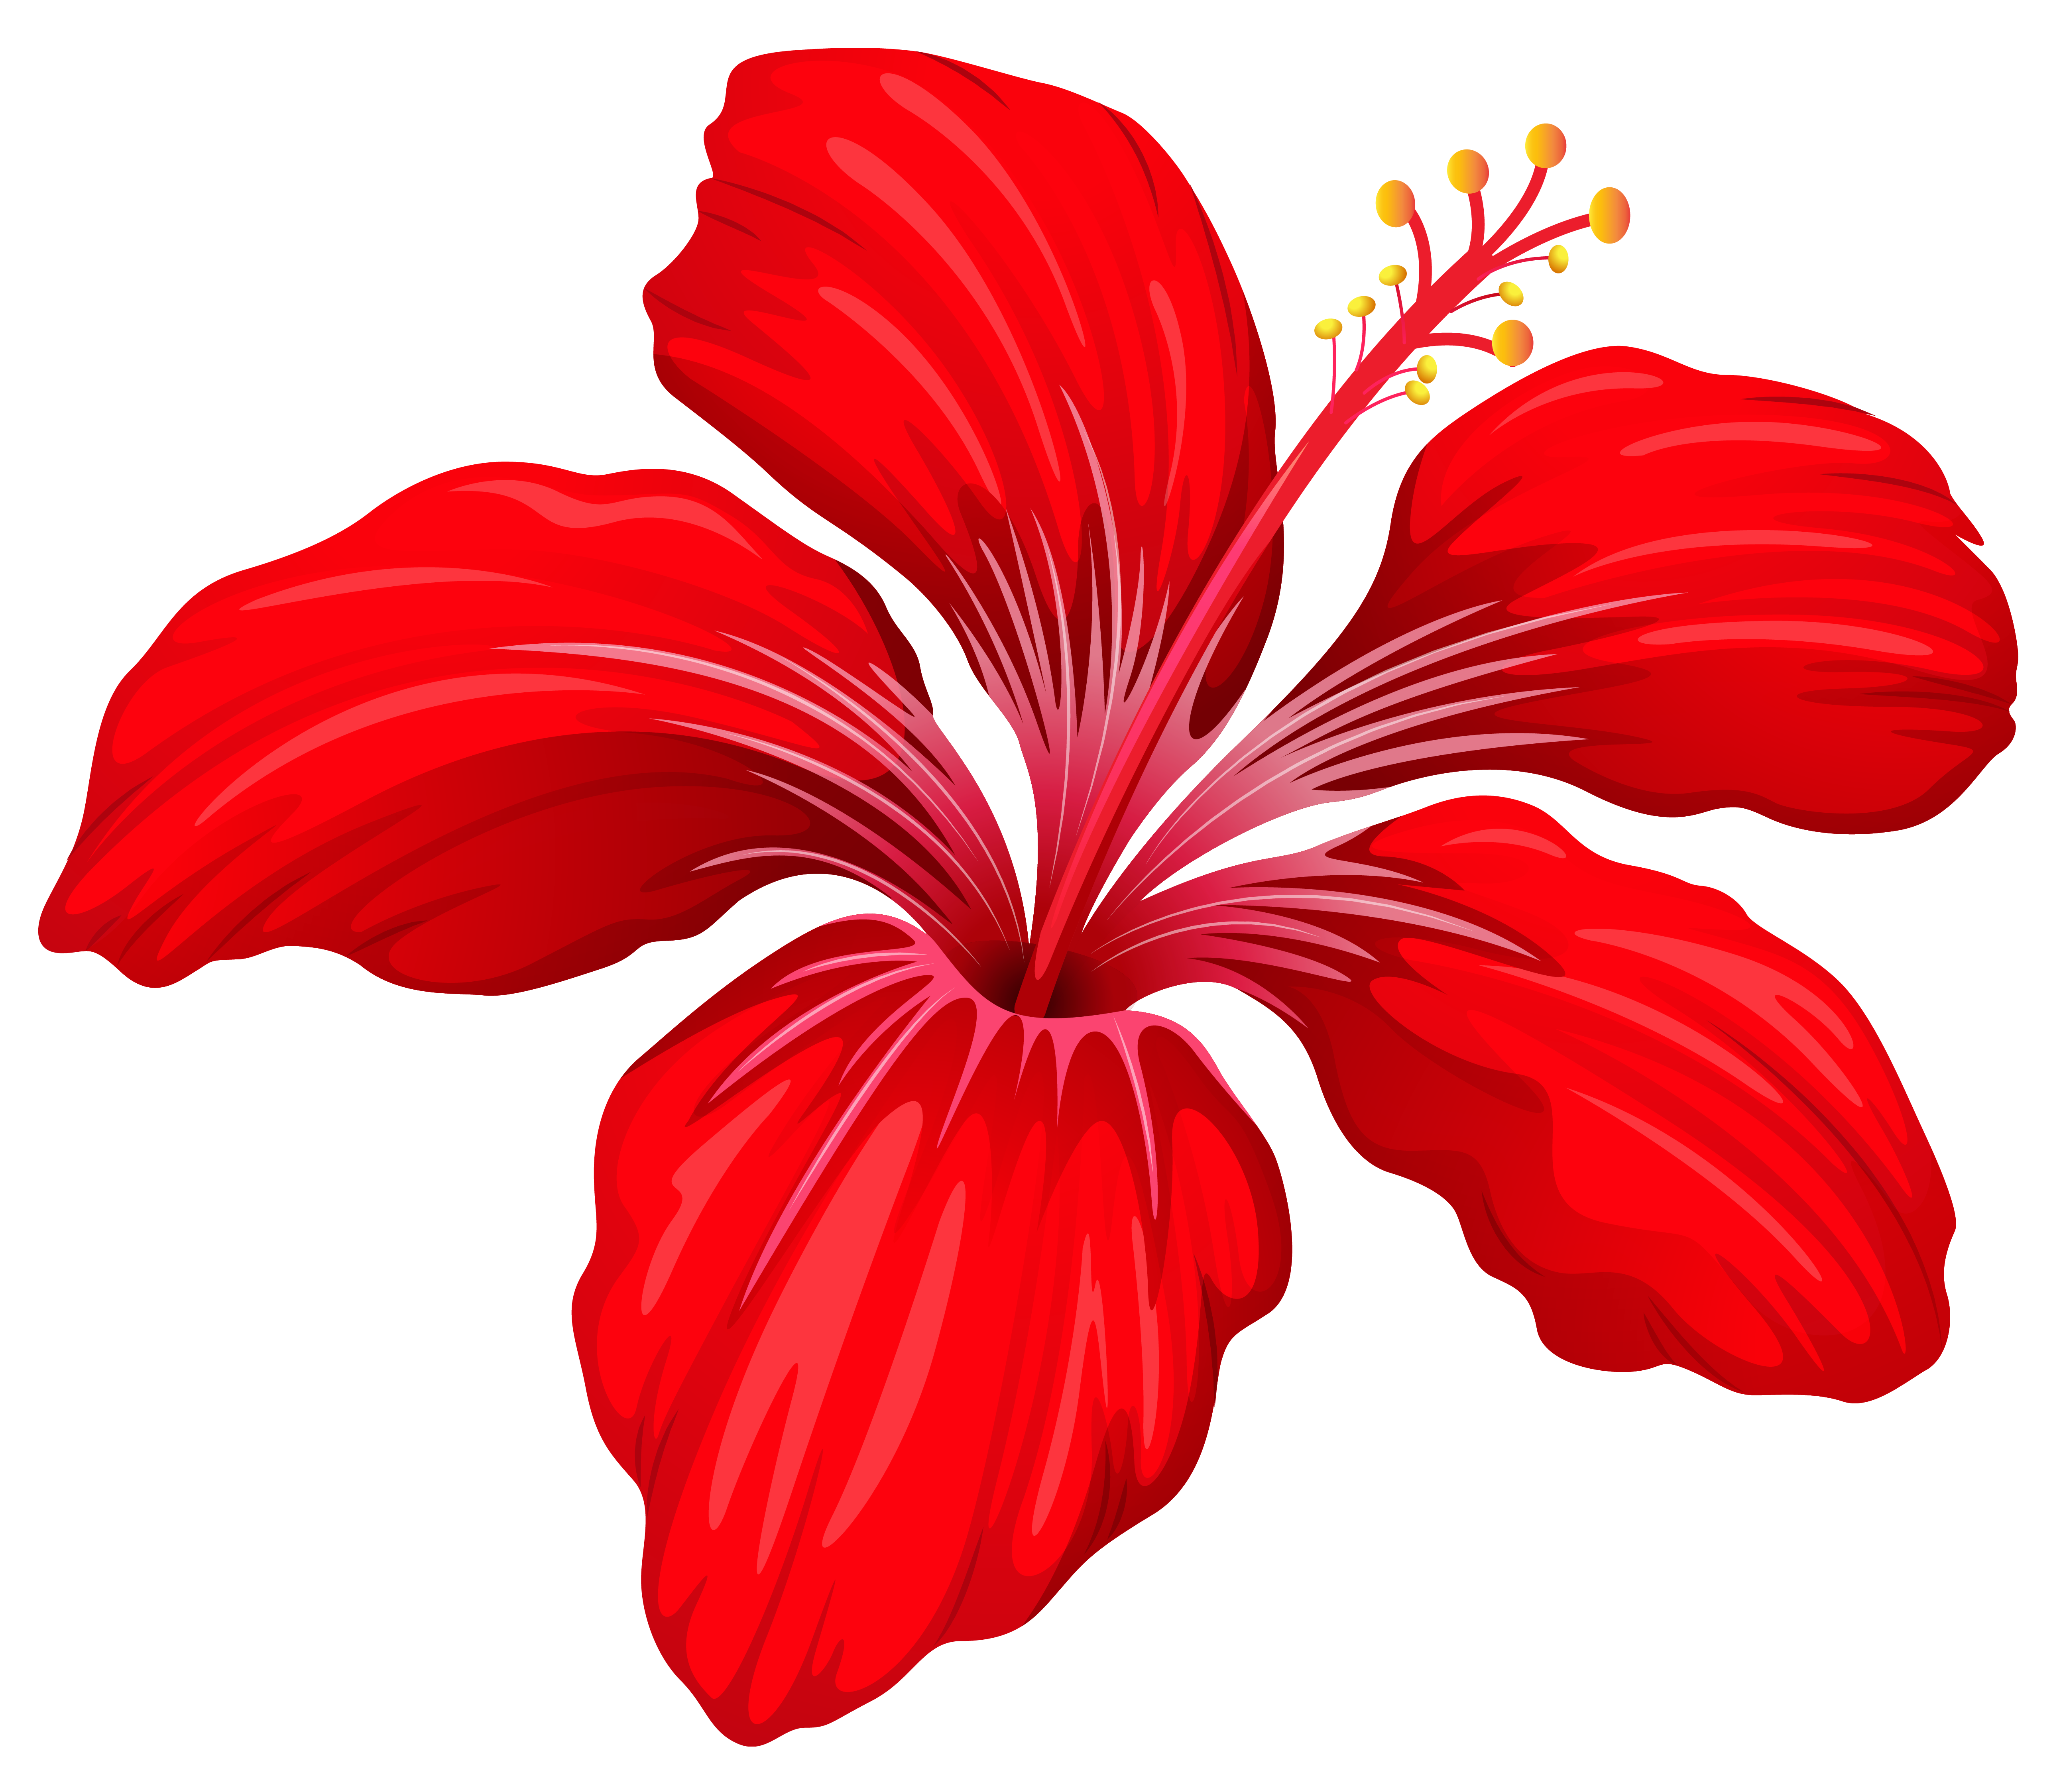 Exotic Red Flower PNG Image | Gallery Yopriceville - High-Quality ...